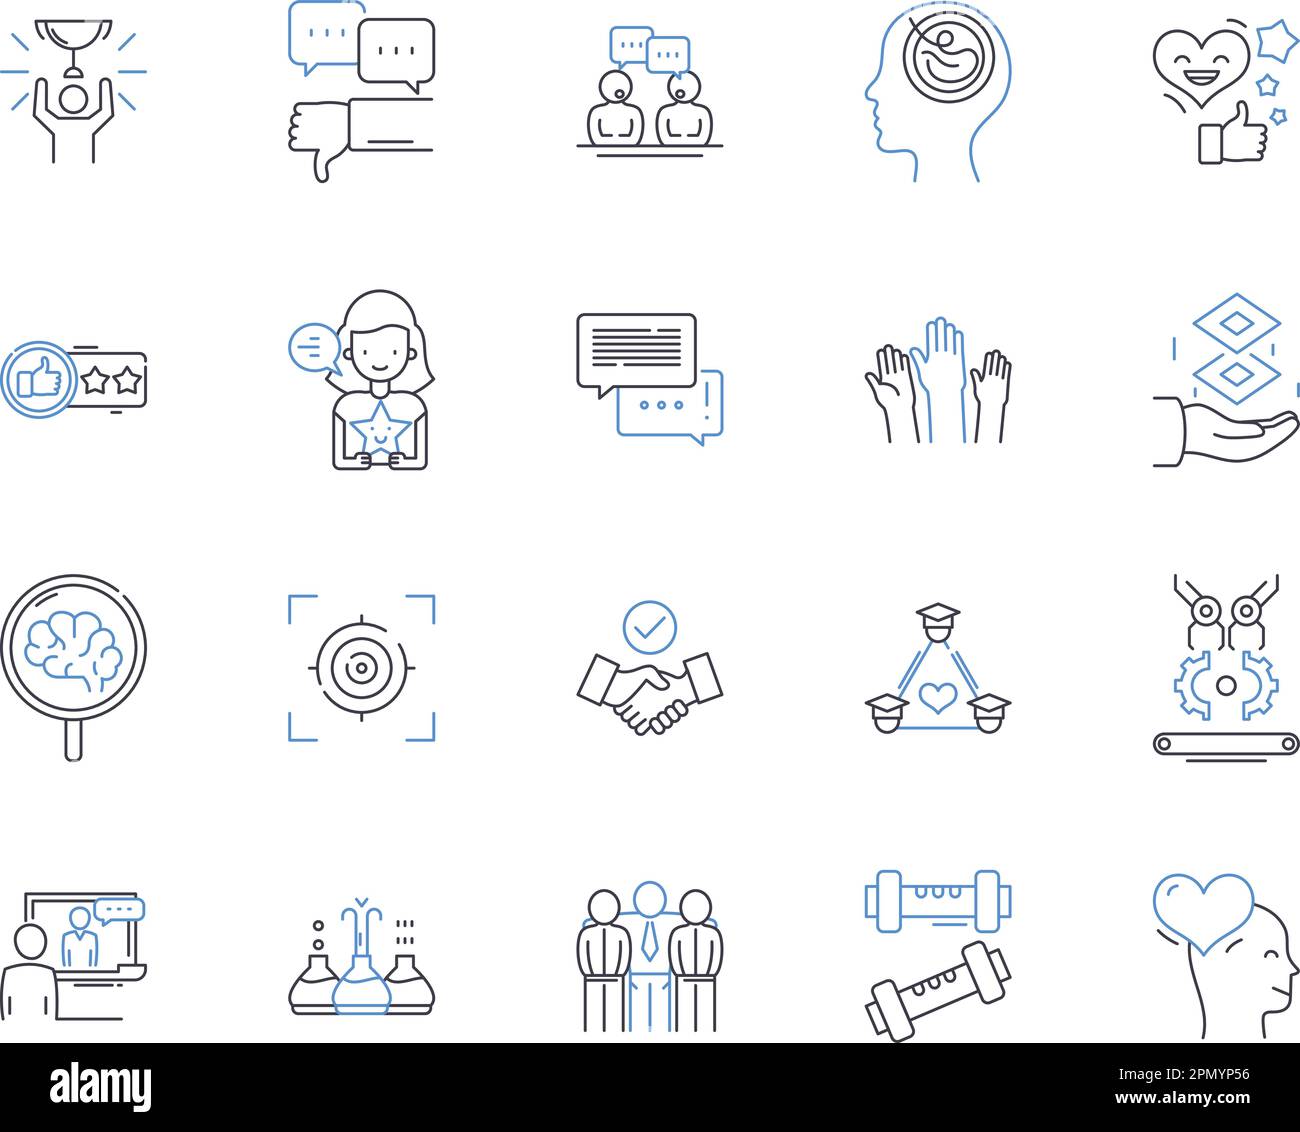 Staff studying outline icons collection. Examining, Learning, Gaining, Educating, Grasping, Delving, Investigating vector and illustration concept set Stock Vector